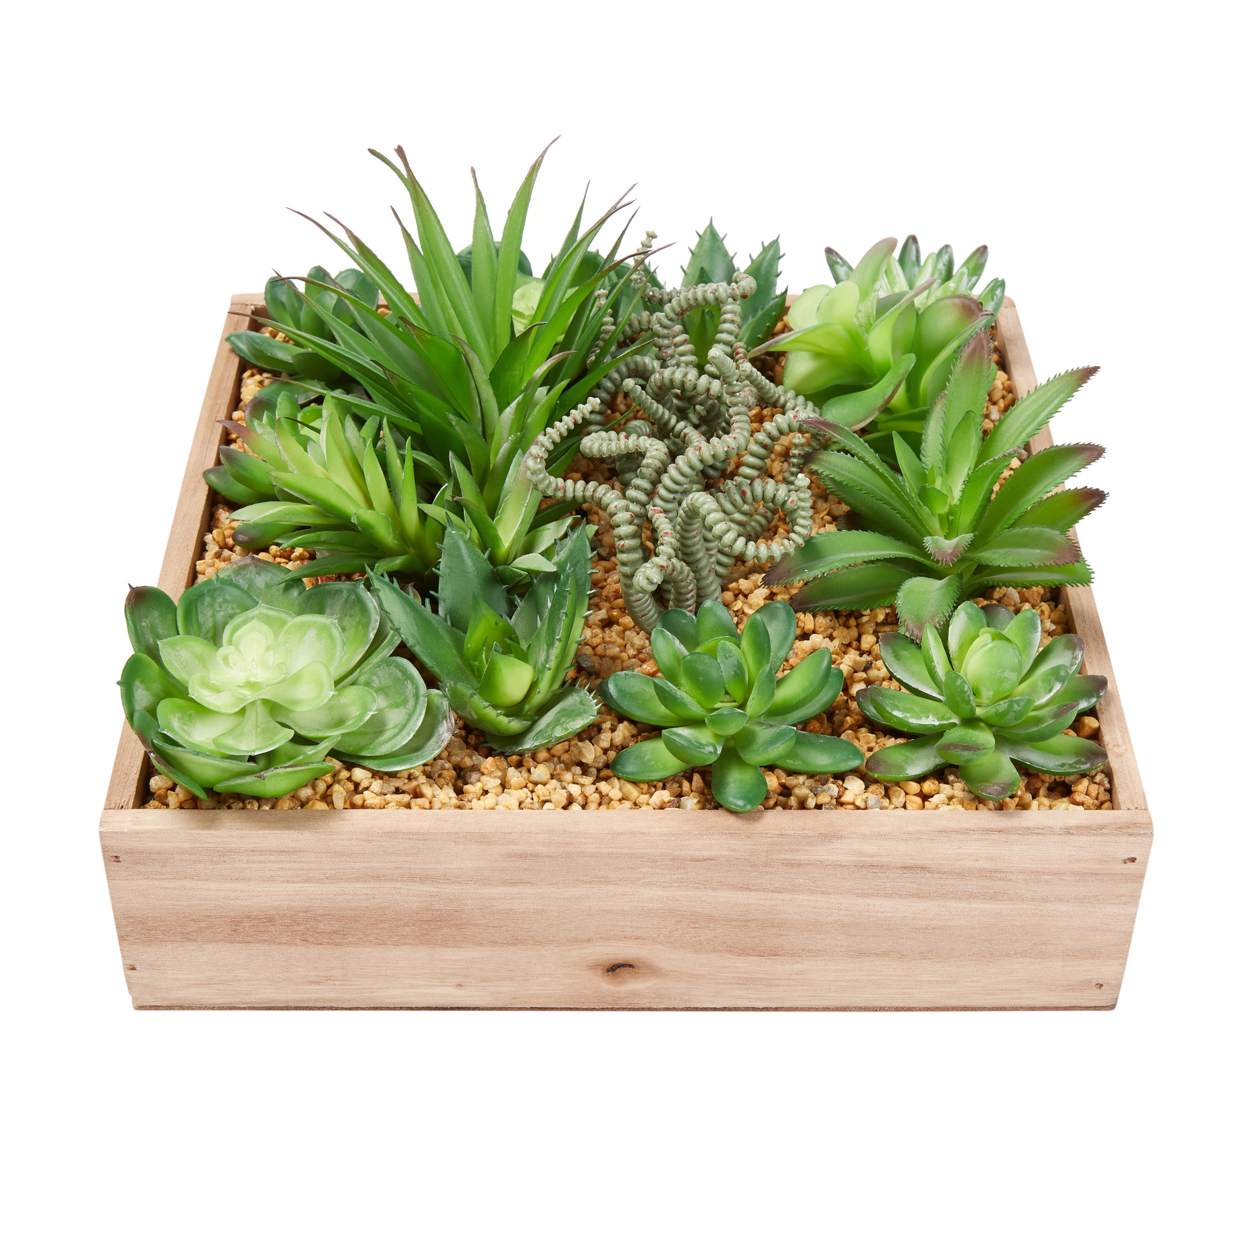 Faux Succulents Assorted Lifelike Plastic Greenery Arrangement With 10 Inch Decorative Wooden Box